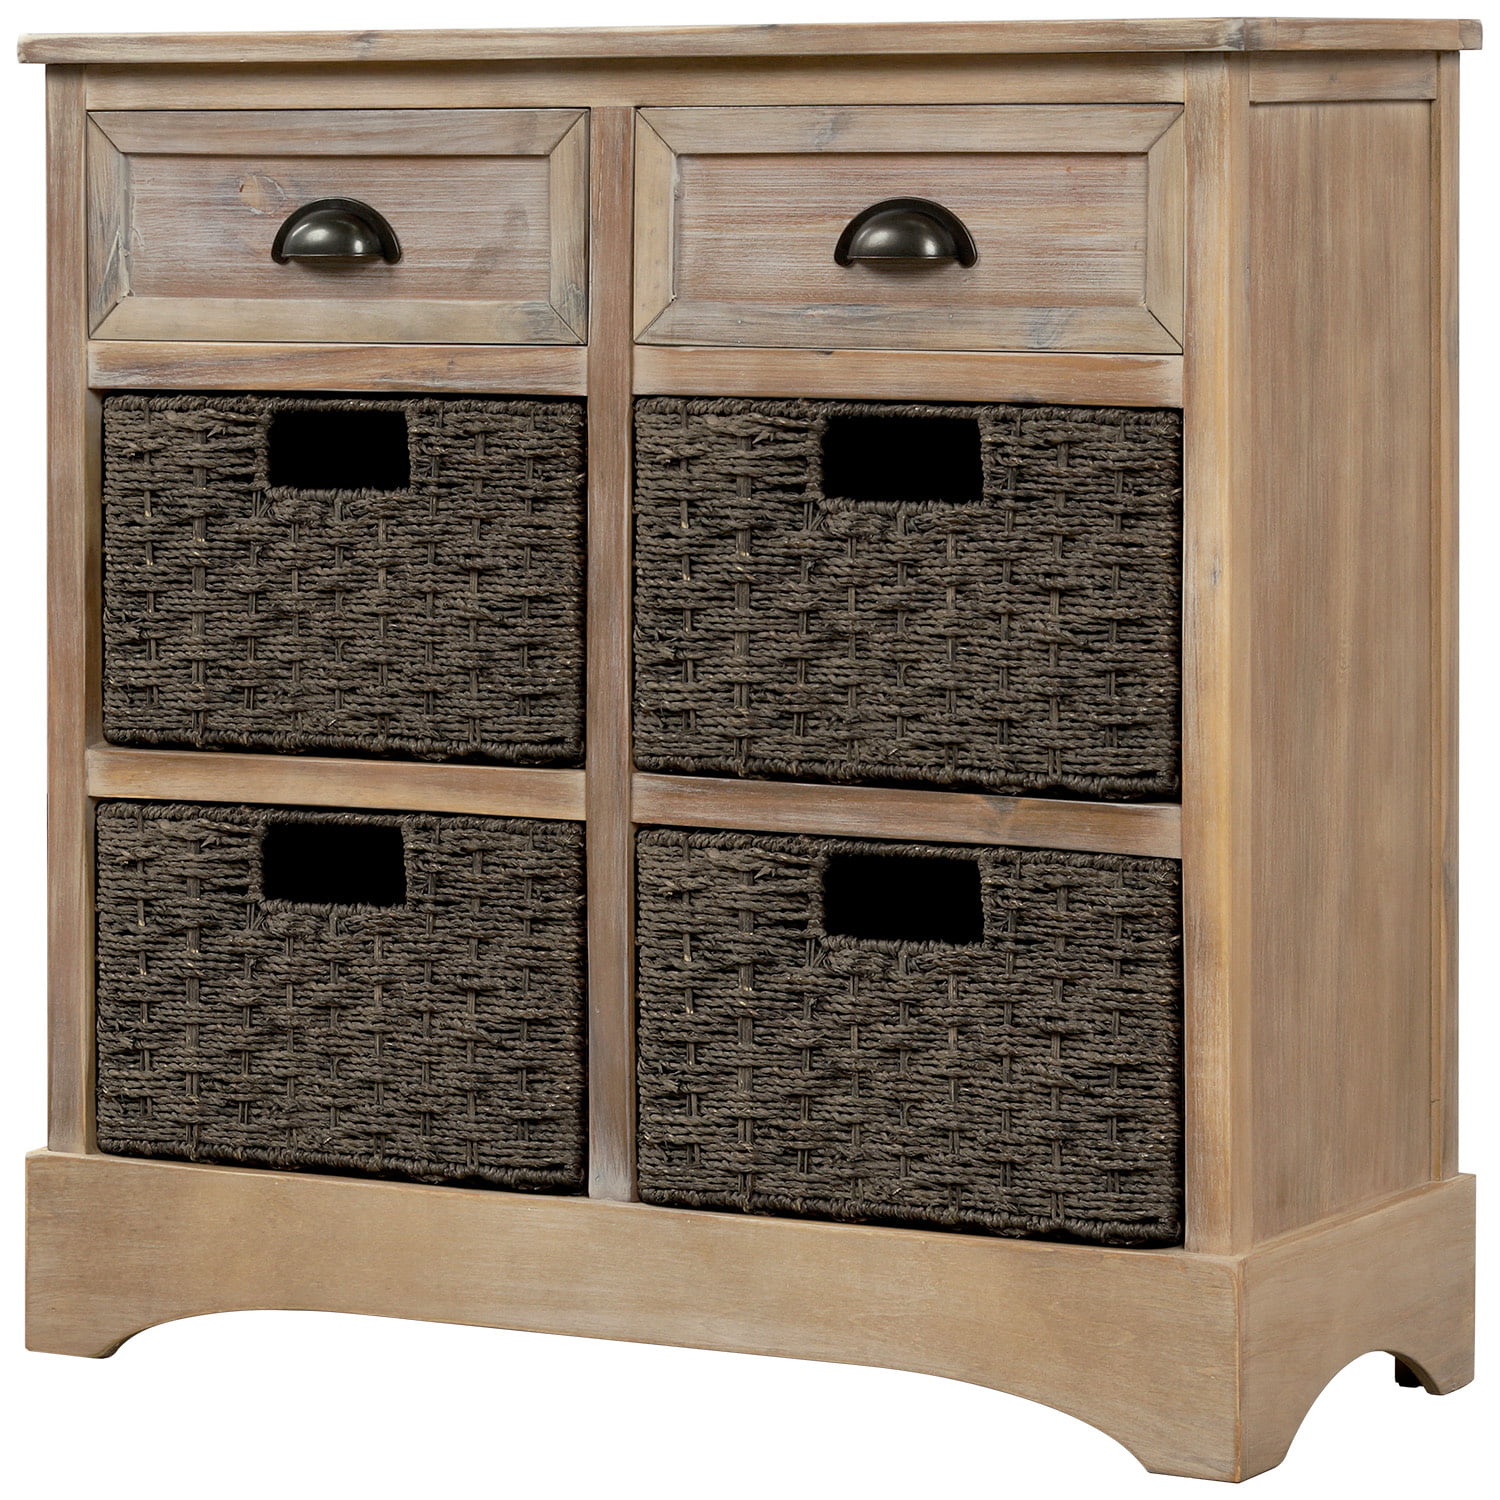 Antique Locker With Two Drawers And Four Classic Fabric Baskets For Kitchen Dining Entrance Living Room